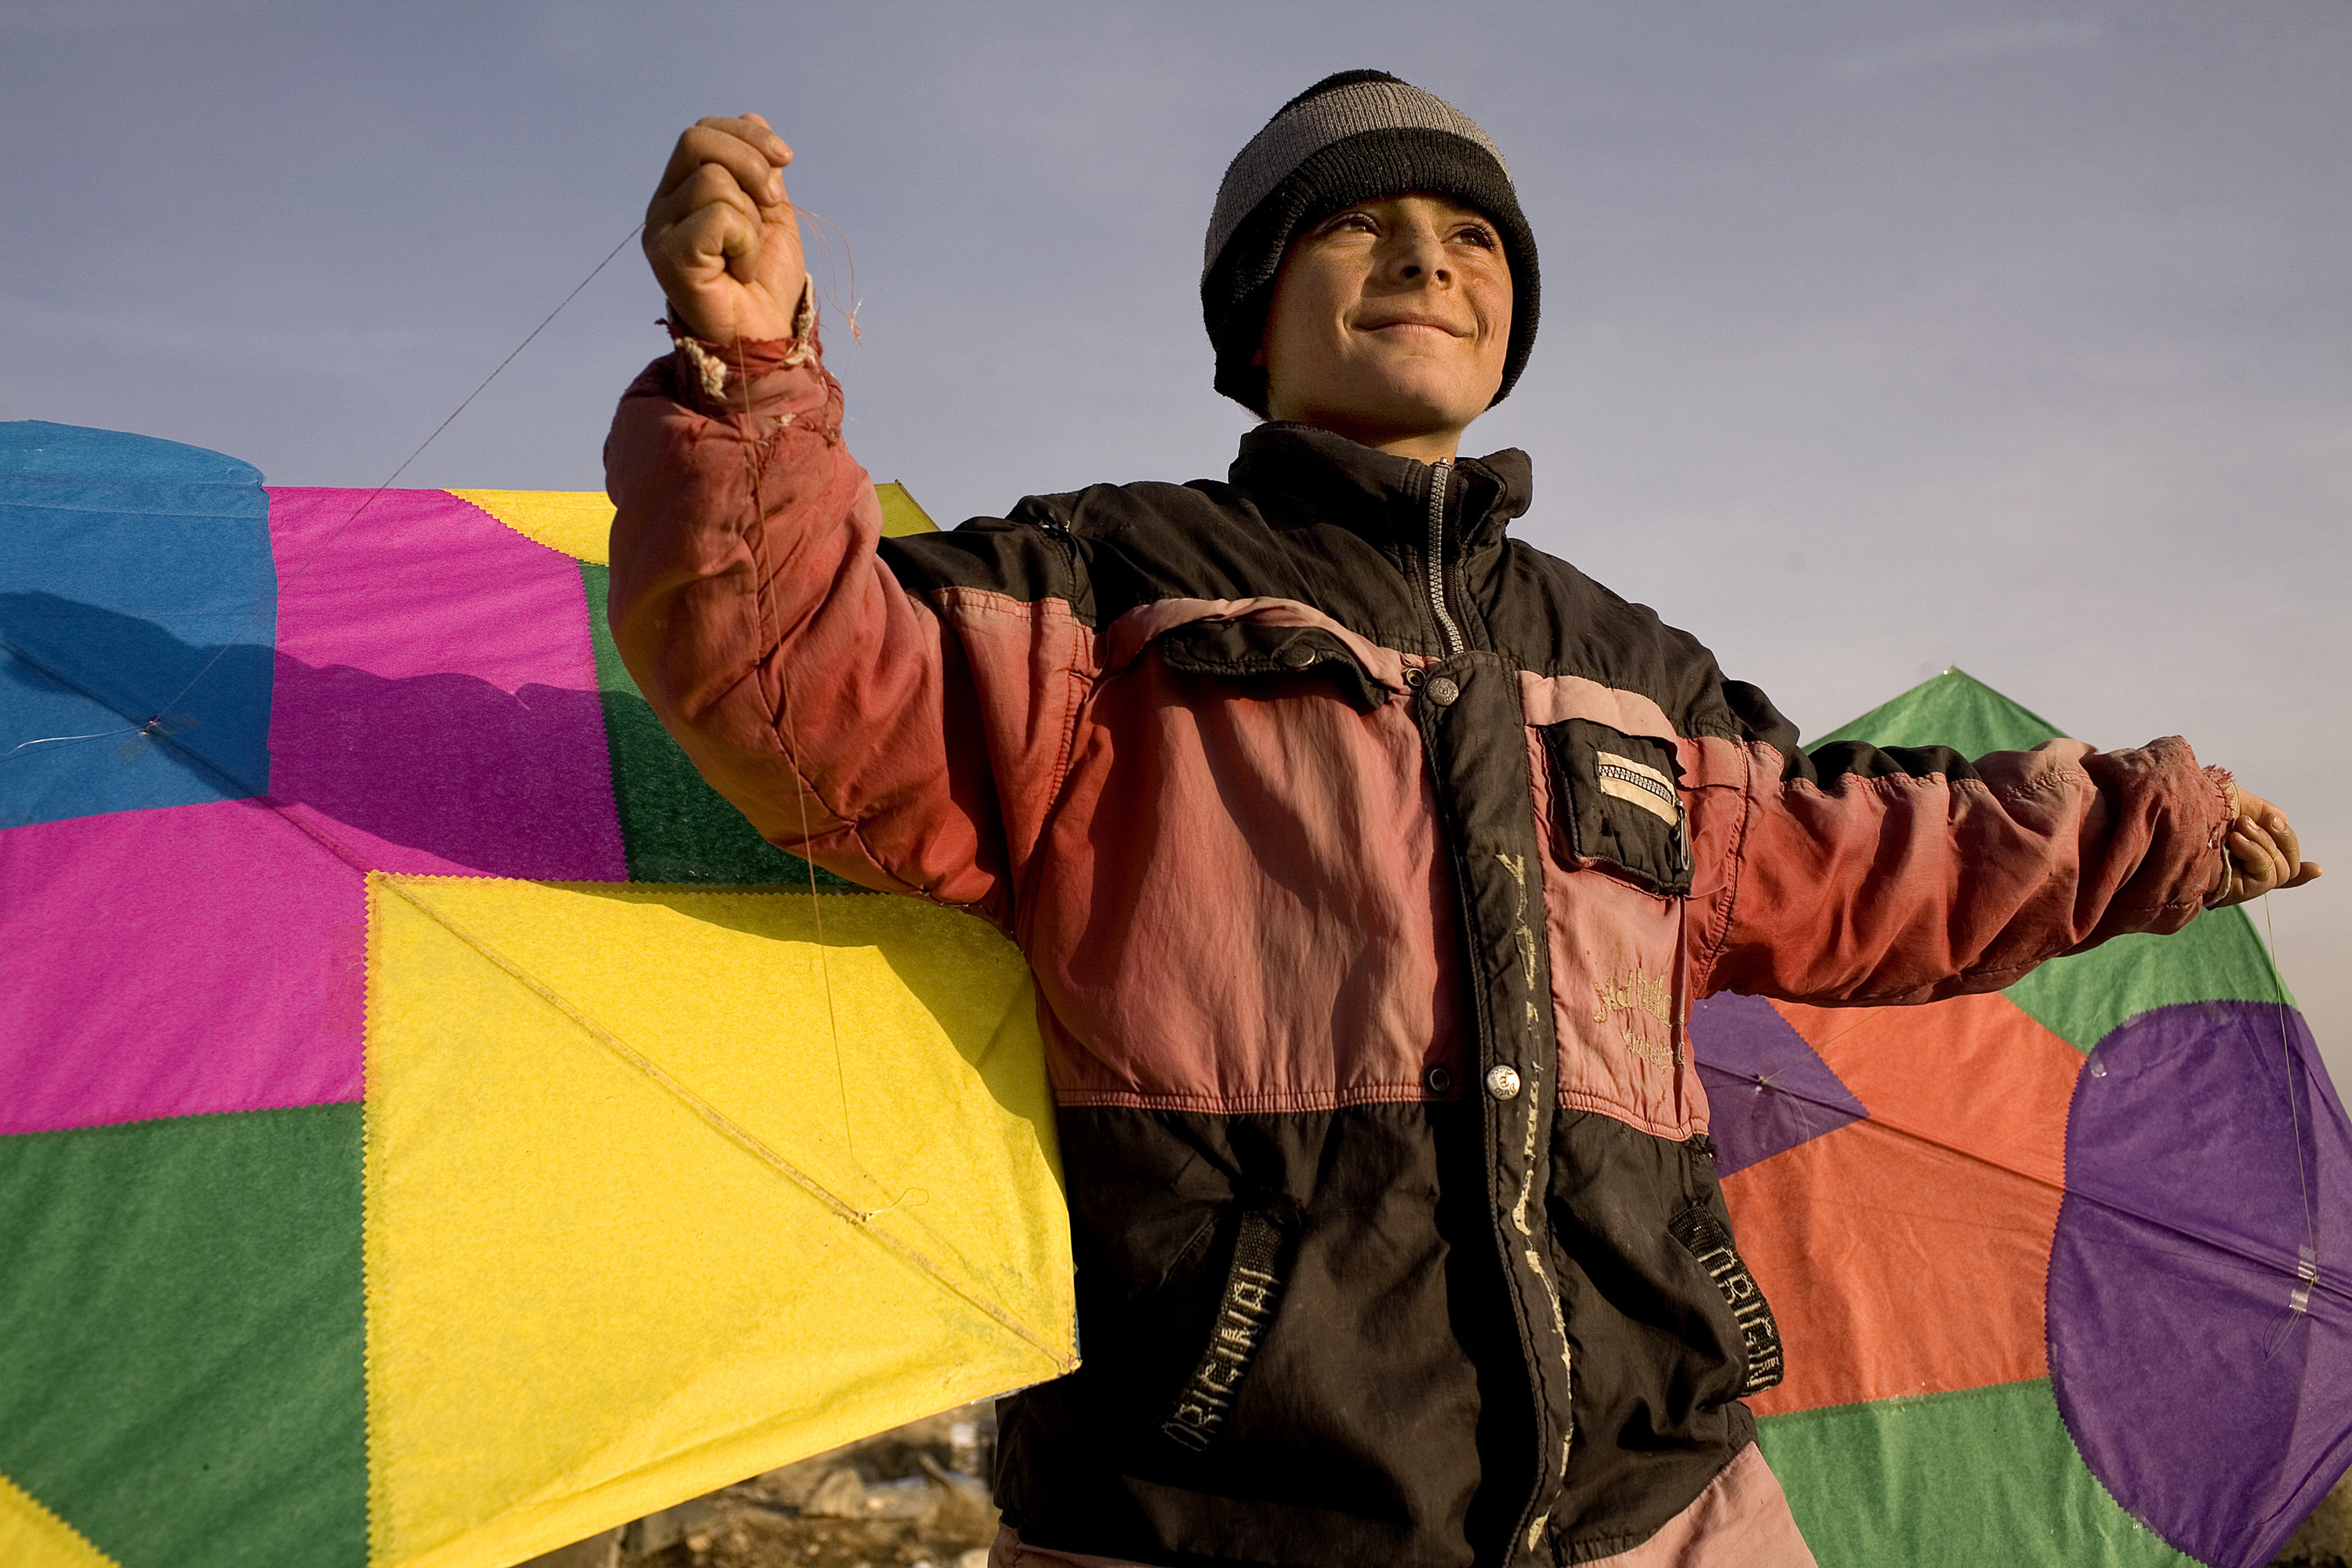 A young boy holding two kites